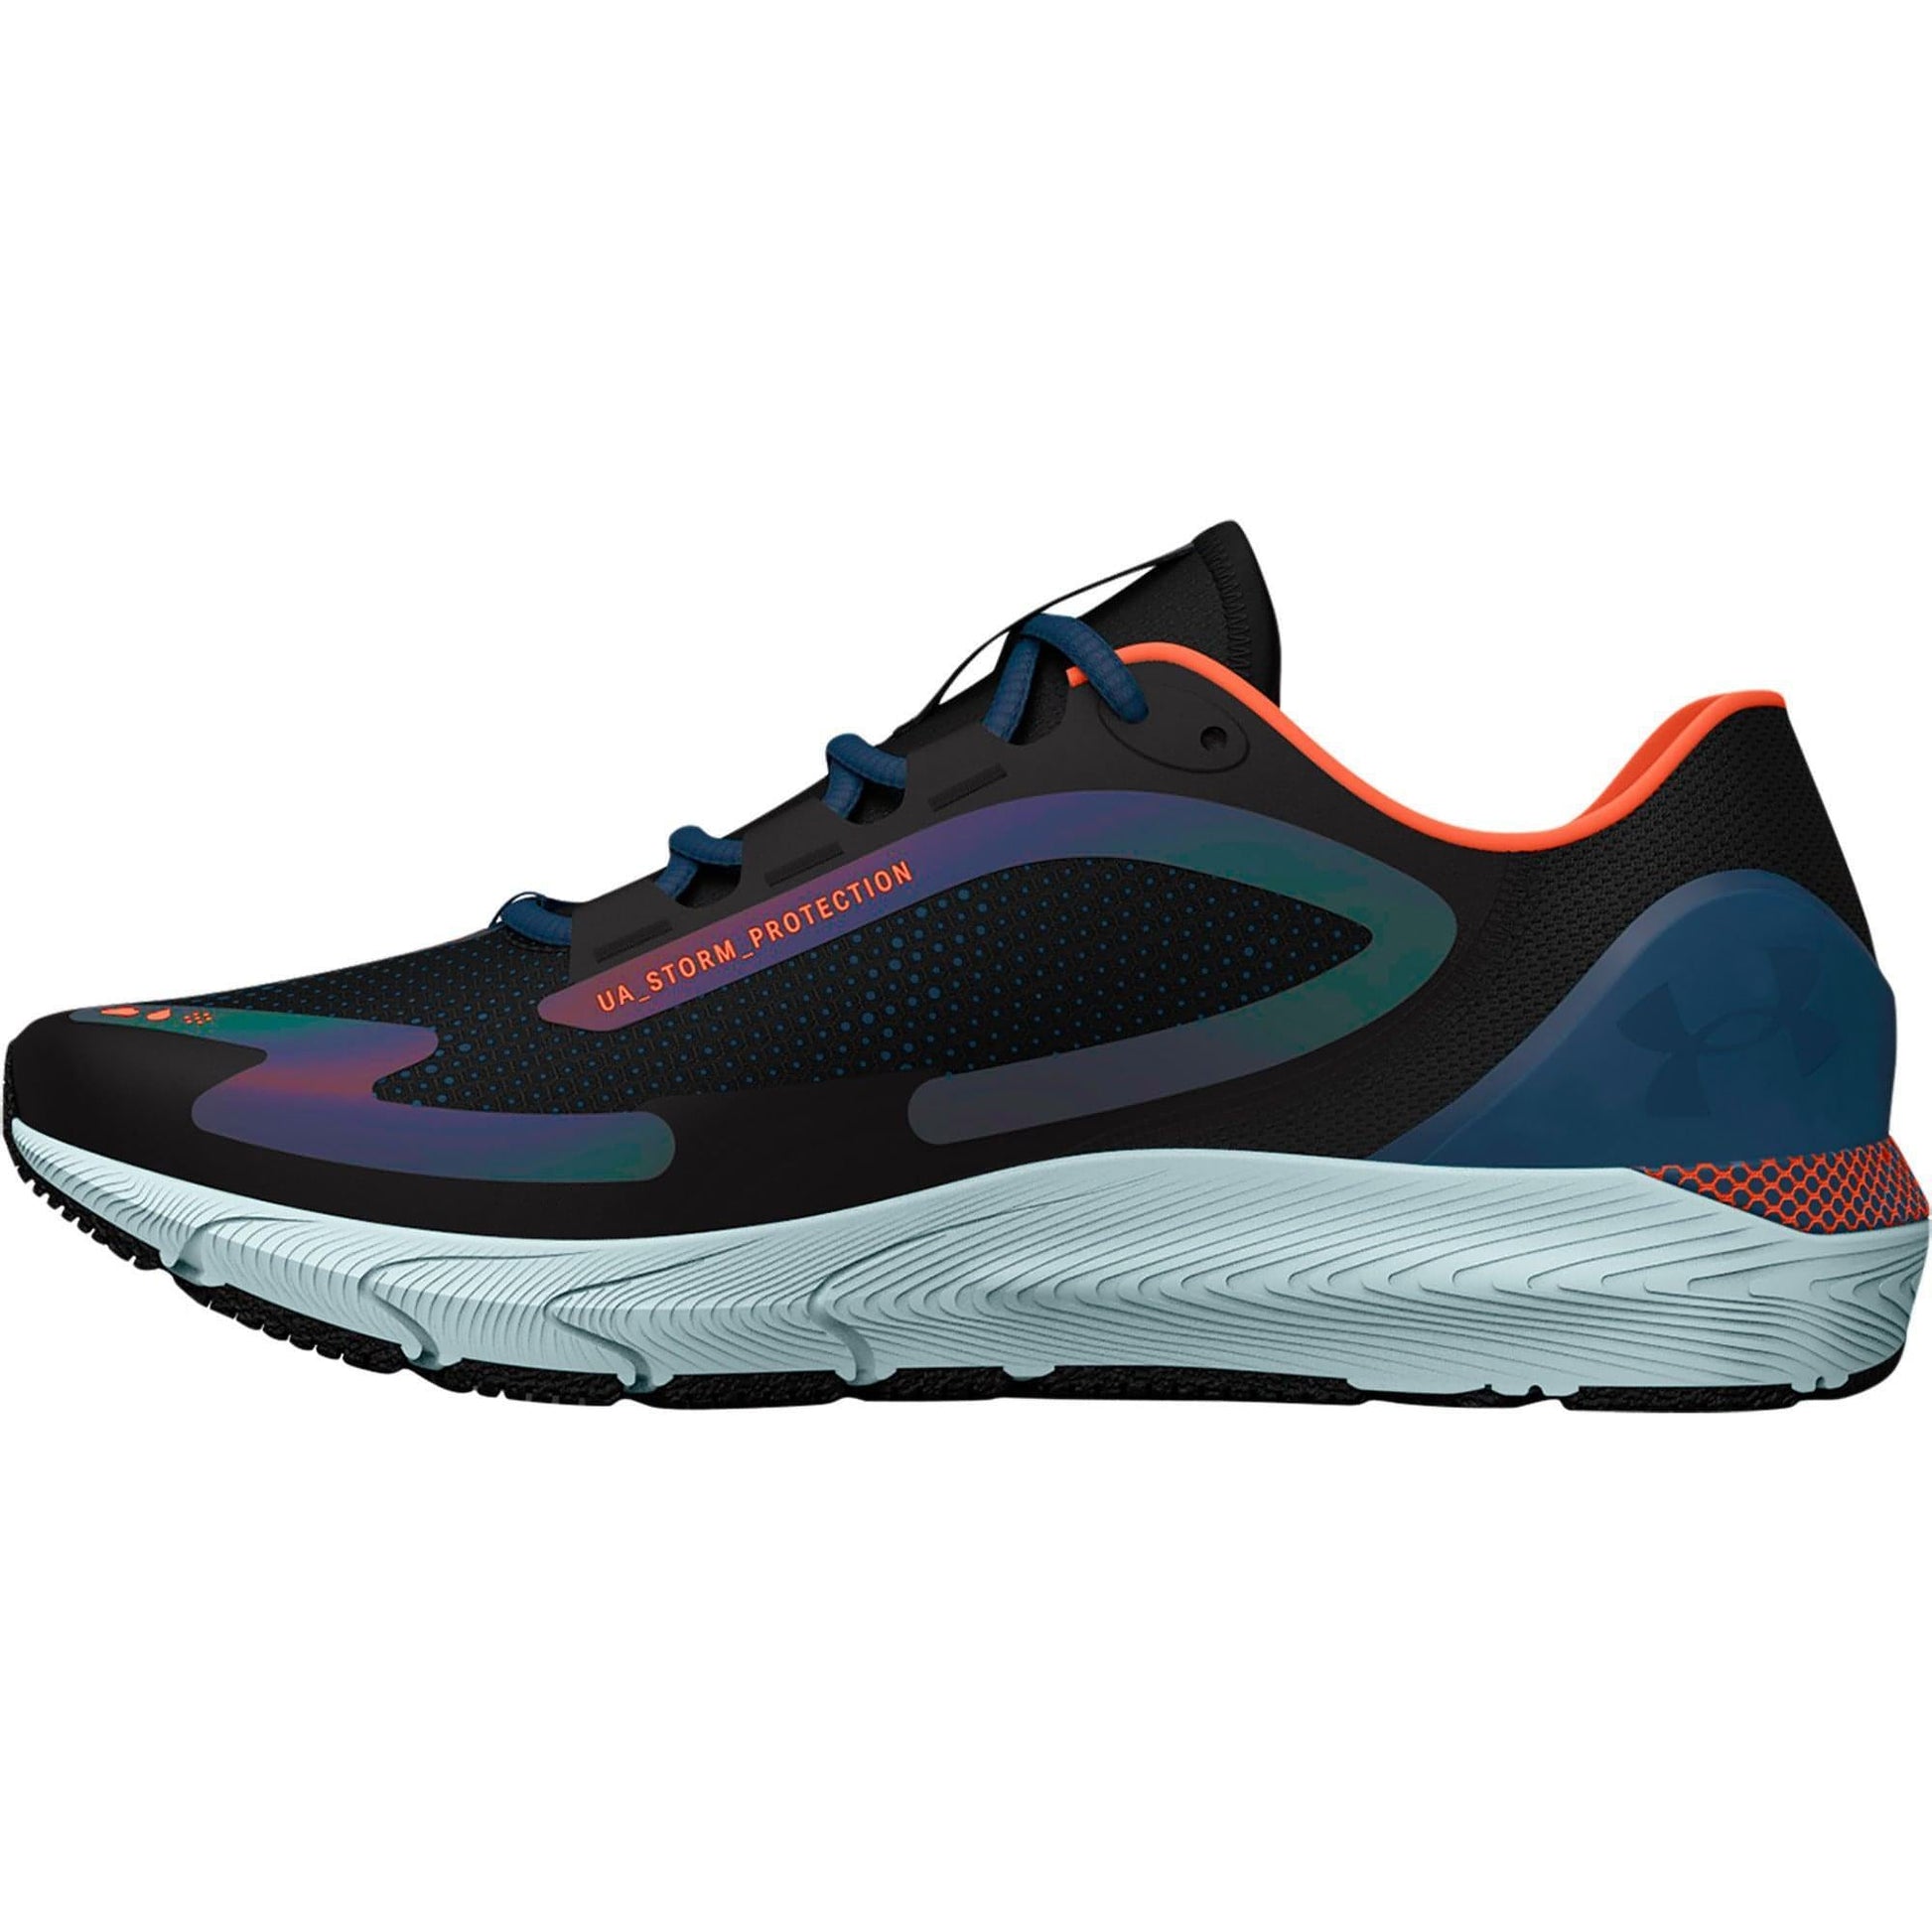 Under Armour Hovr Sonic Storm Inside - Side View